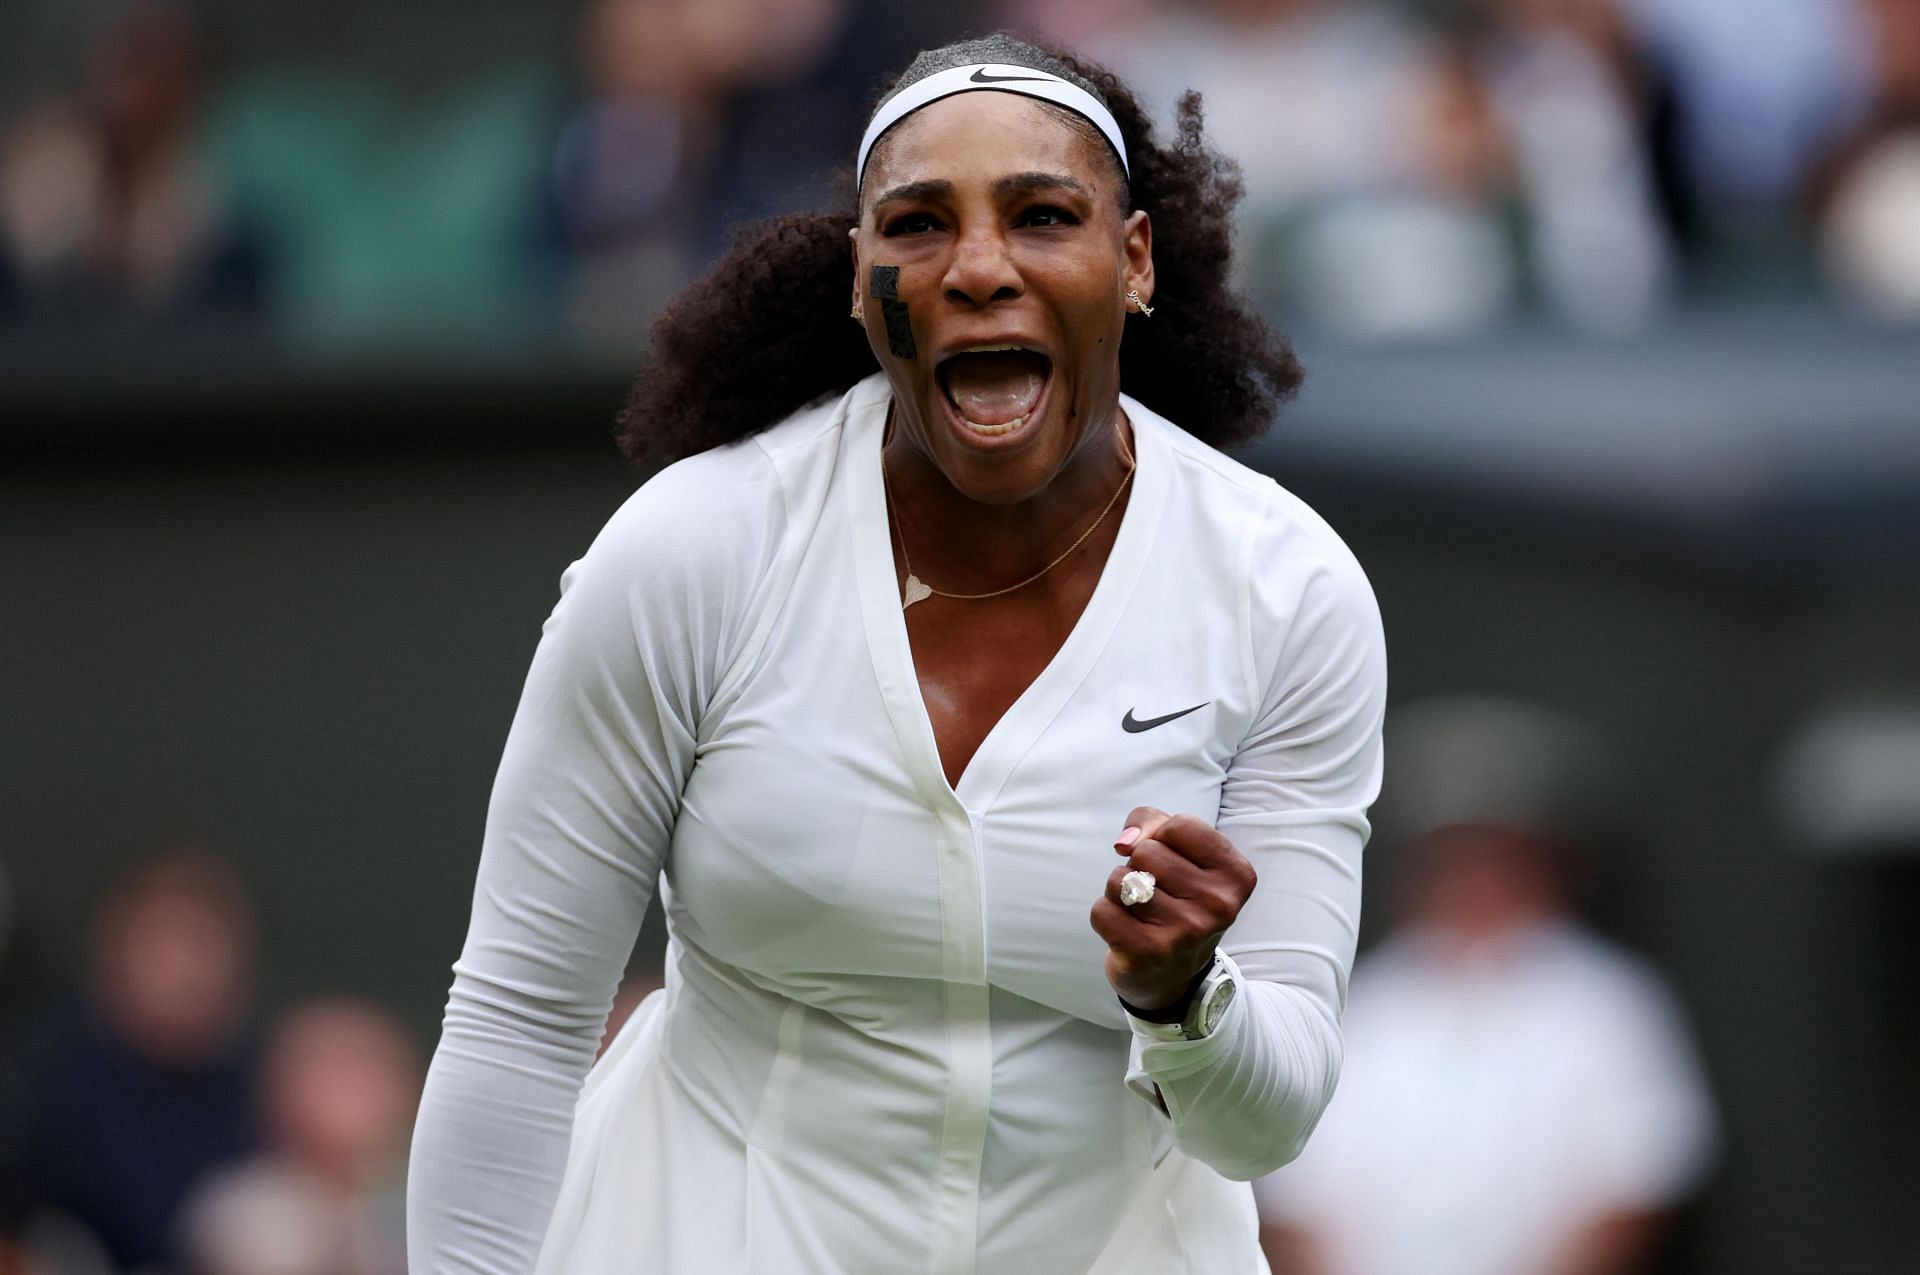 Serena Williams in action during The Championships - Wimbledon 2022